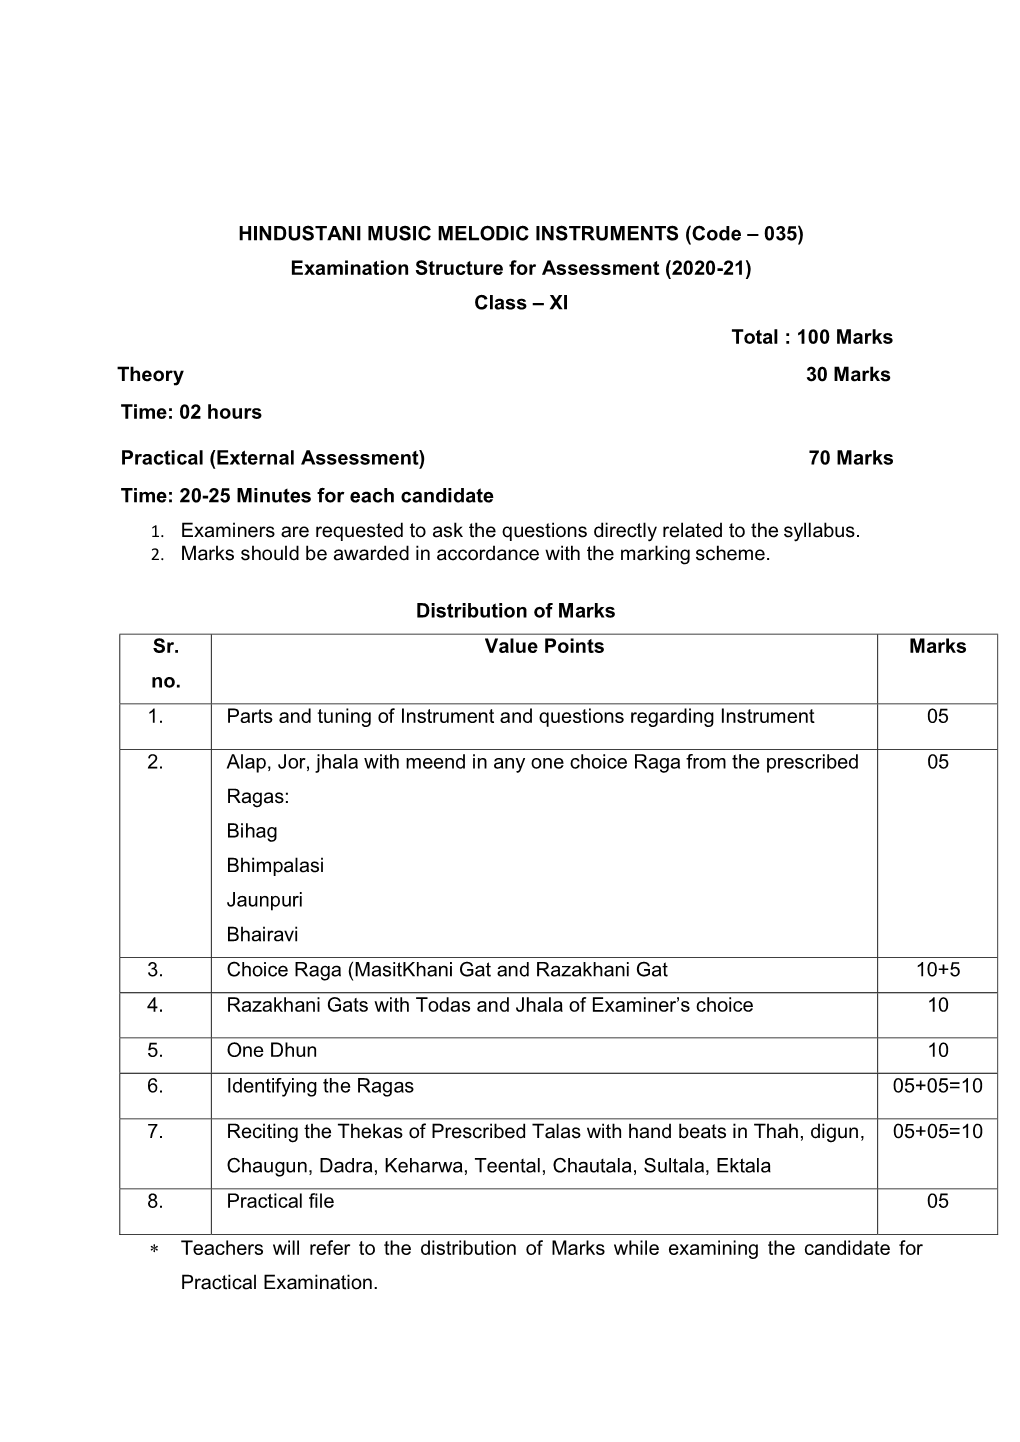 HINDUSTANI MUSIC MELODIC INSTRUMENTS (Code – 035) Examination Structure for Assessment (2020-21) Class – XI Total : 100 Marks